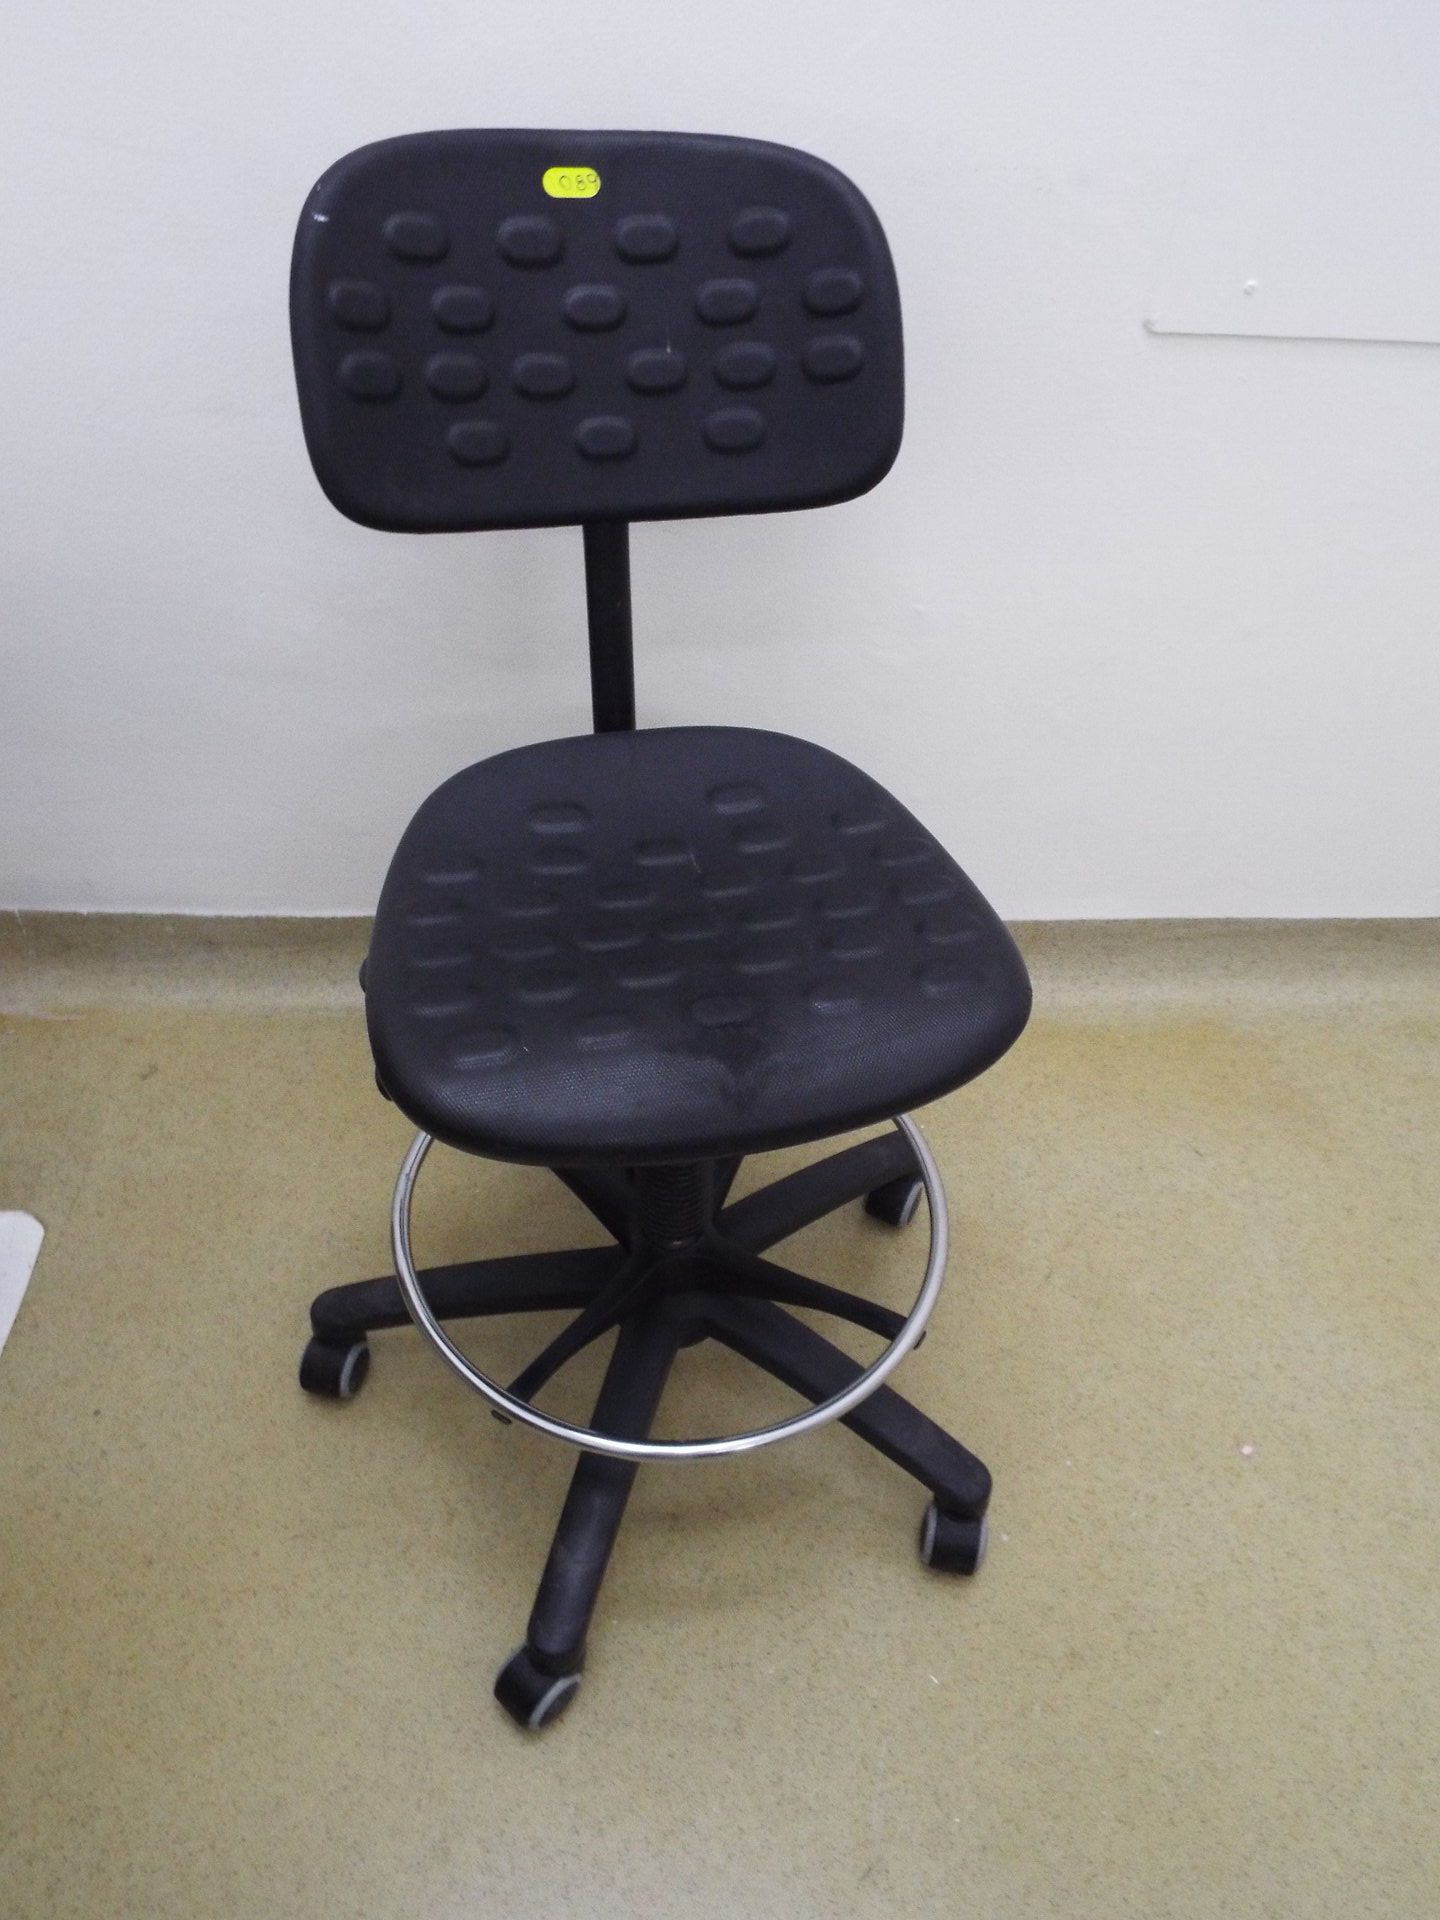 (6) elevating working chairs on casters - Image 3 of 4